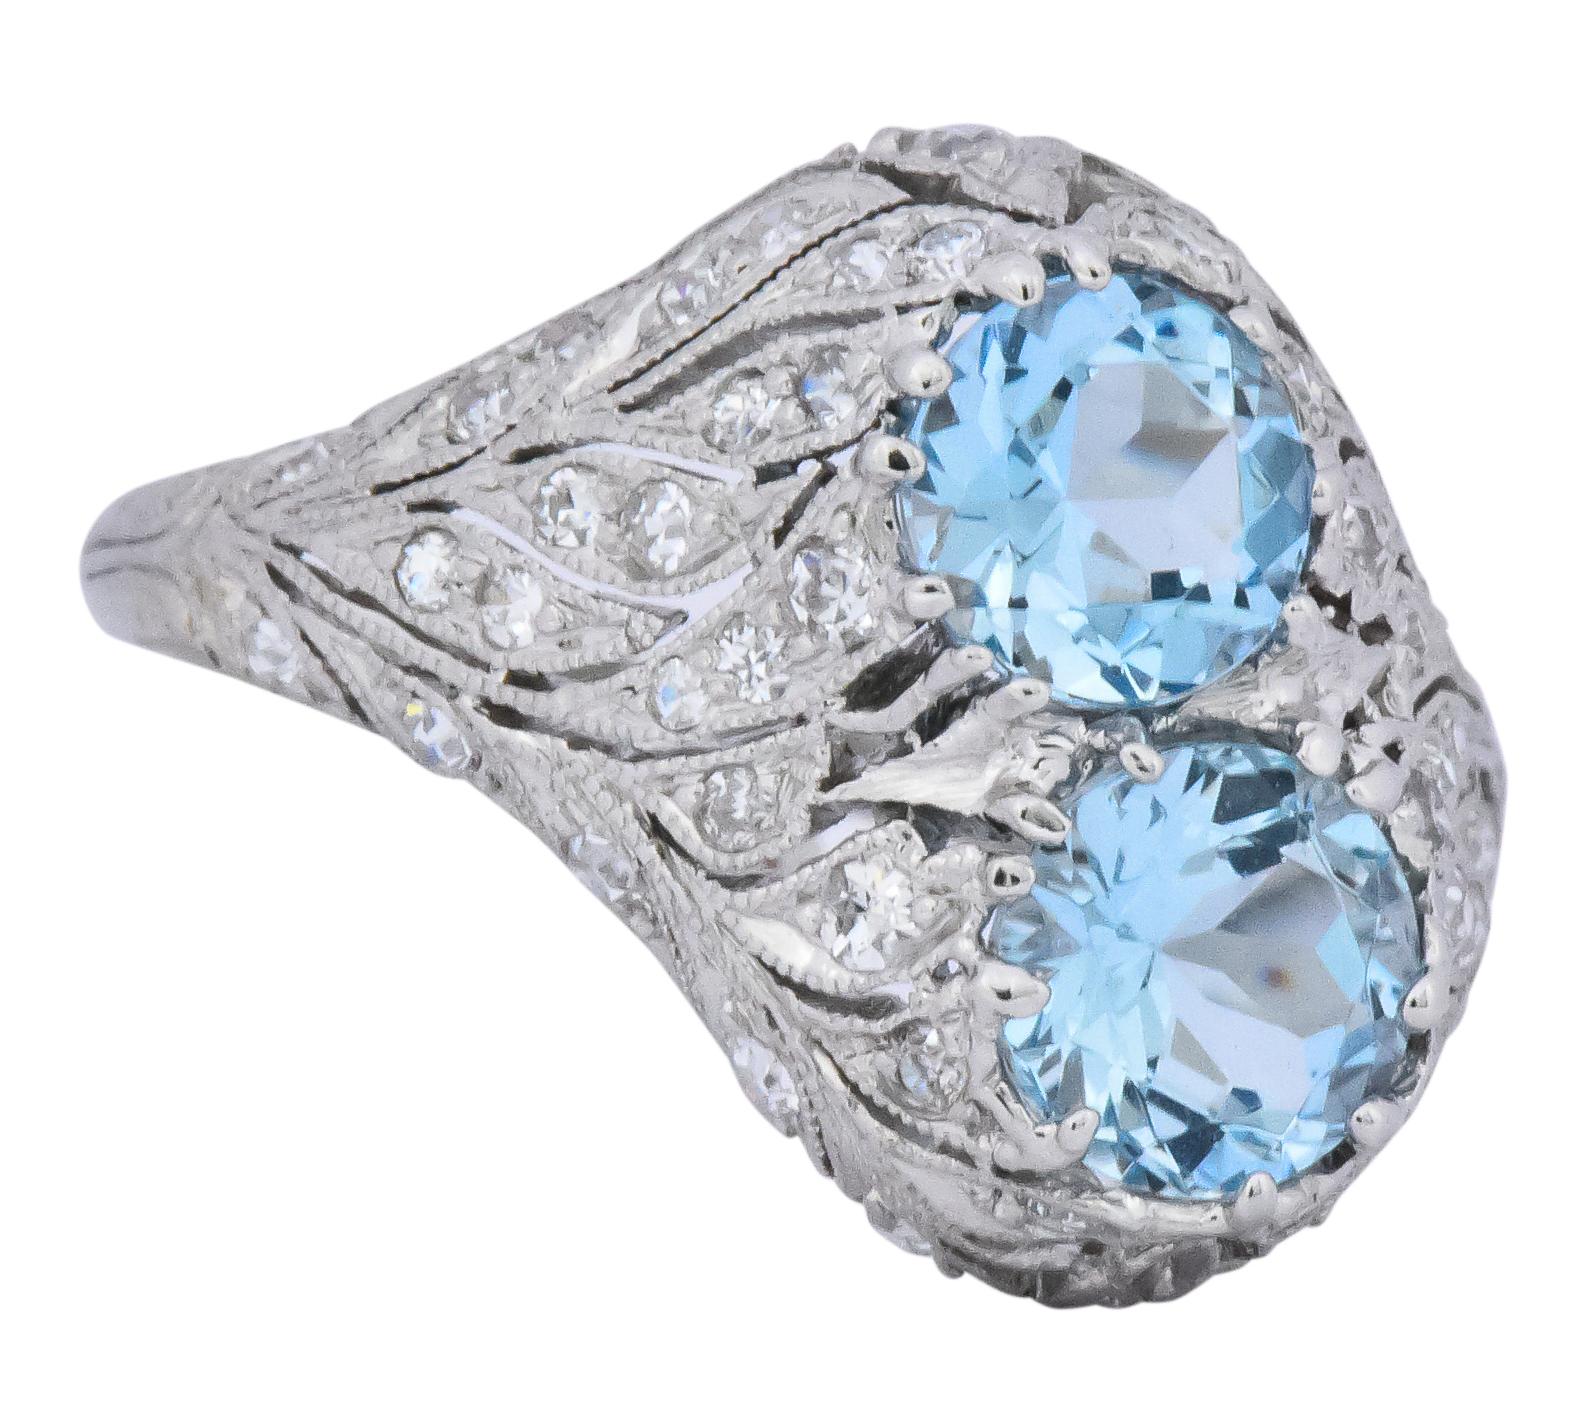 Centering two round aquamarines weighing approximately 1.25 carats total, bright medium blue and very well matched

In a pierced, flowing foliate motif gallery

Set throughout with single and old European cut diamonds, weighing approximately 0.55